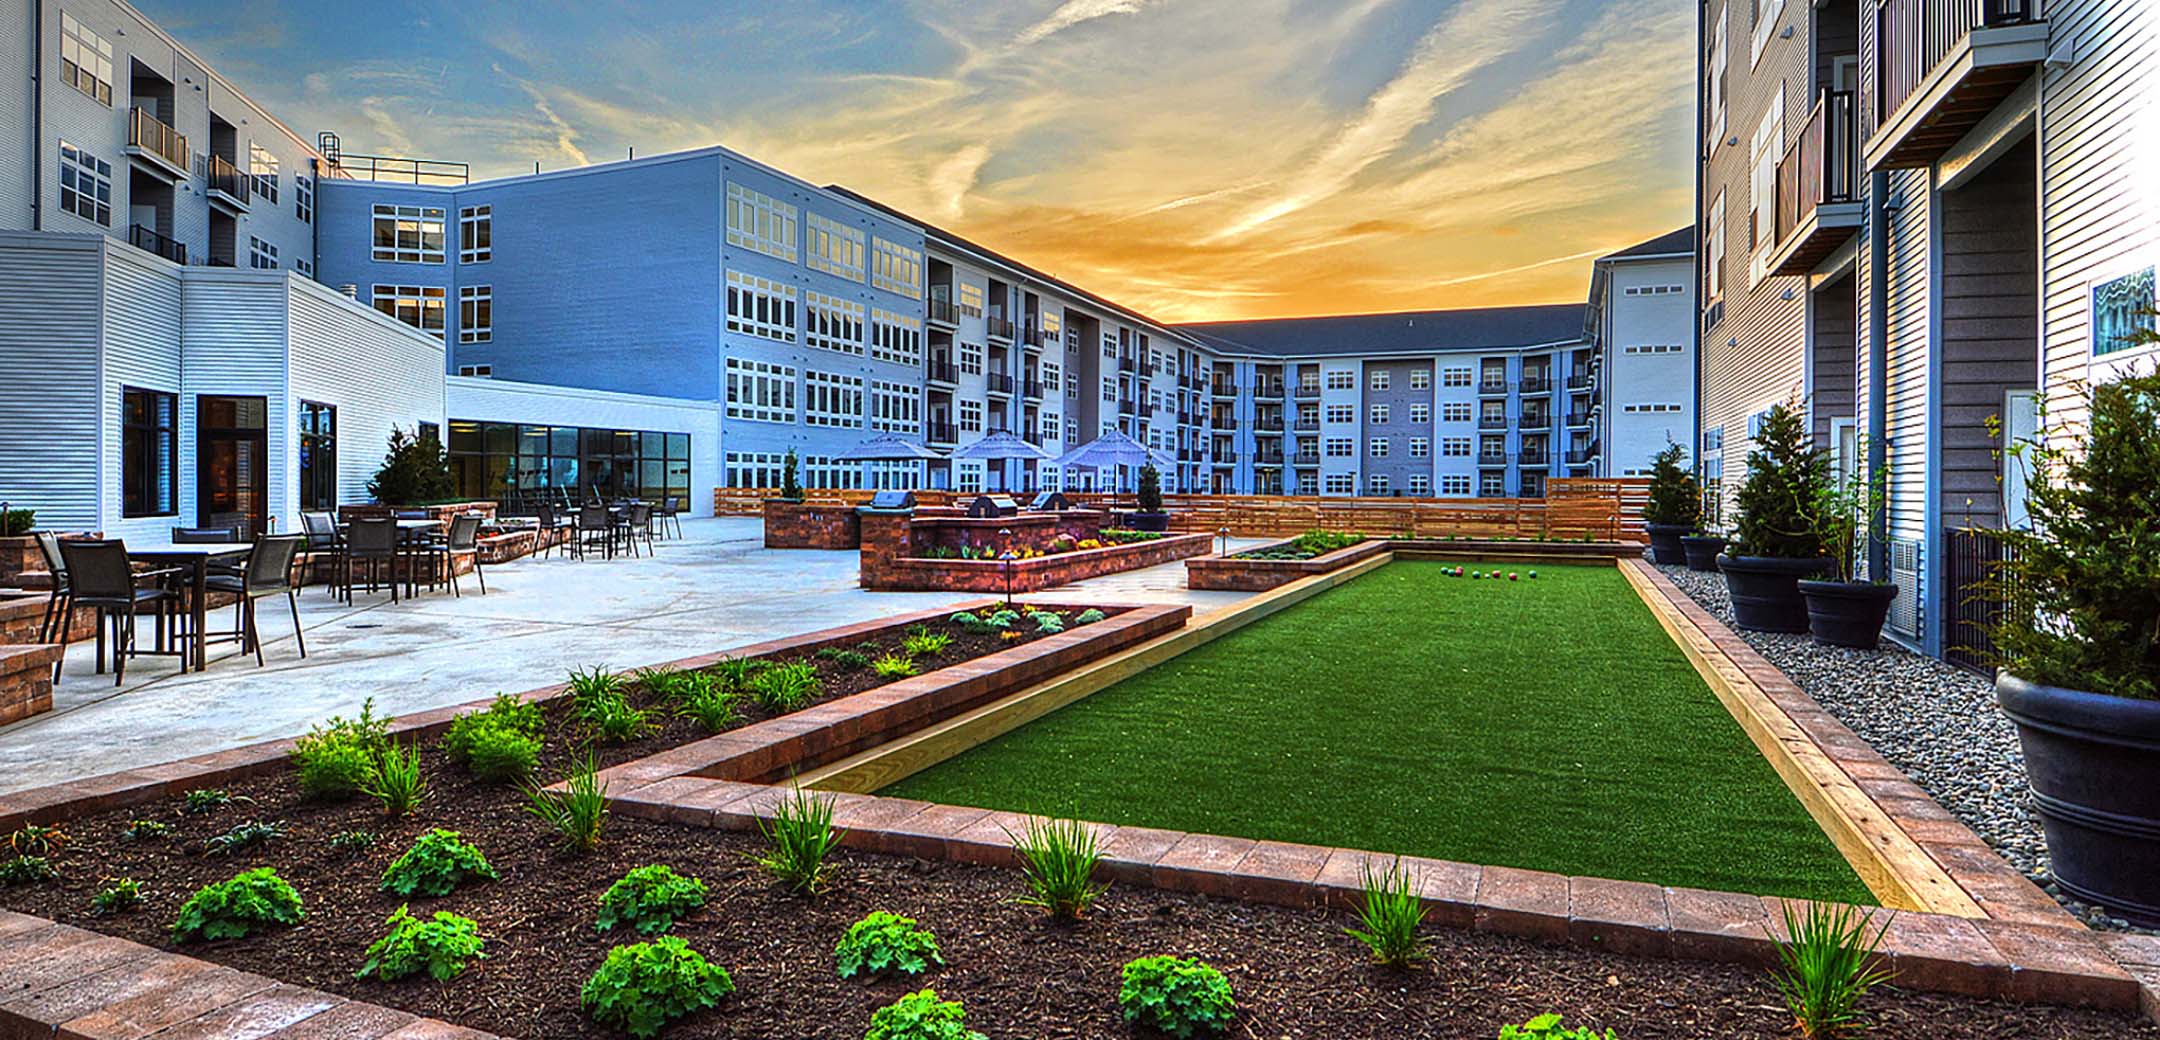 An exterior view of the Phoenix Village building showcasing the inner courtyard with a mini polo and outdoor table and chair sitting areas with the apartment windows in the background.